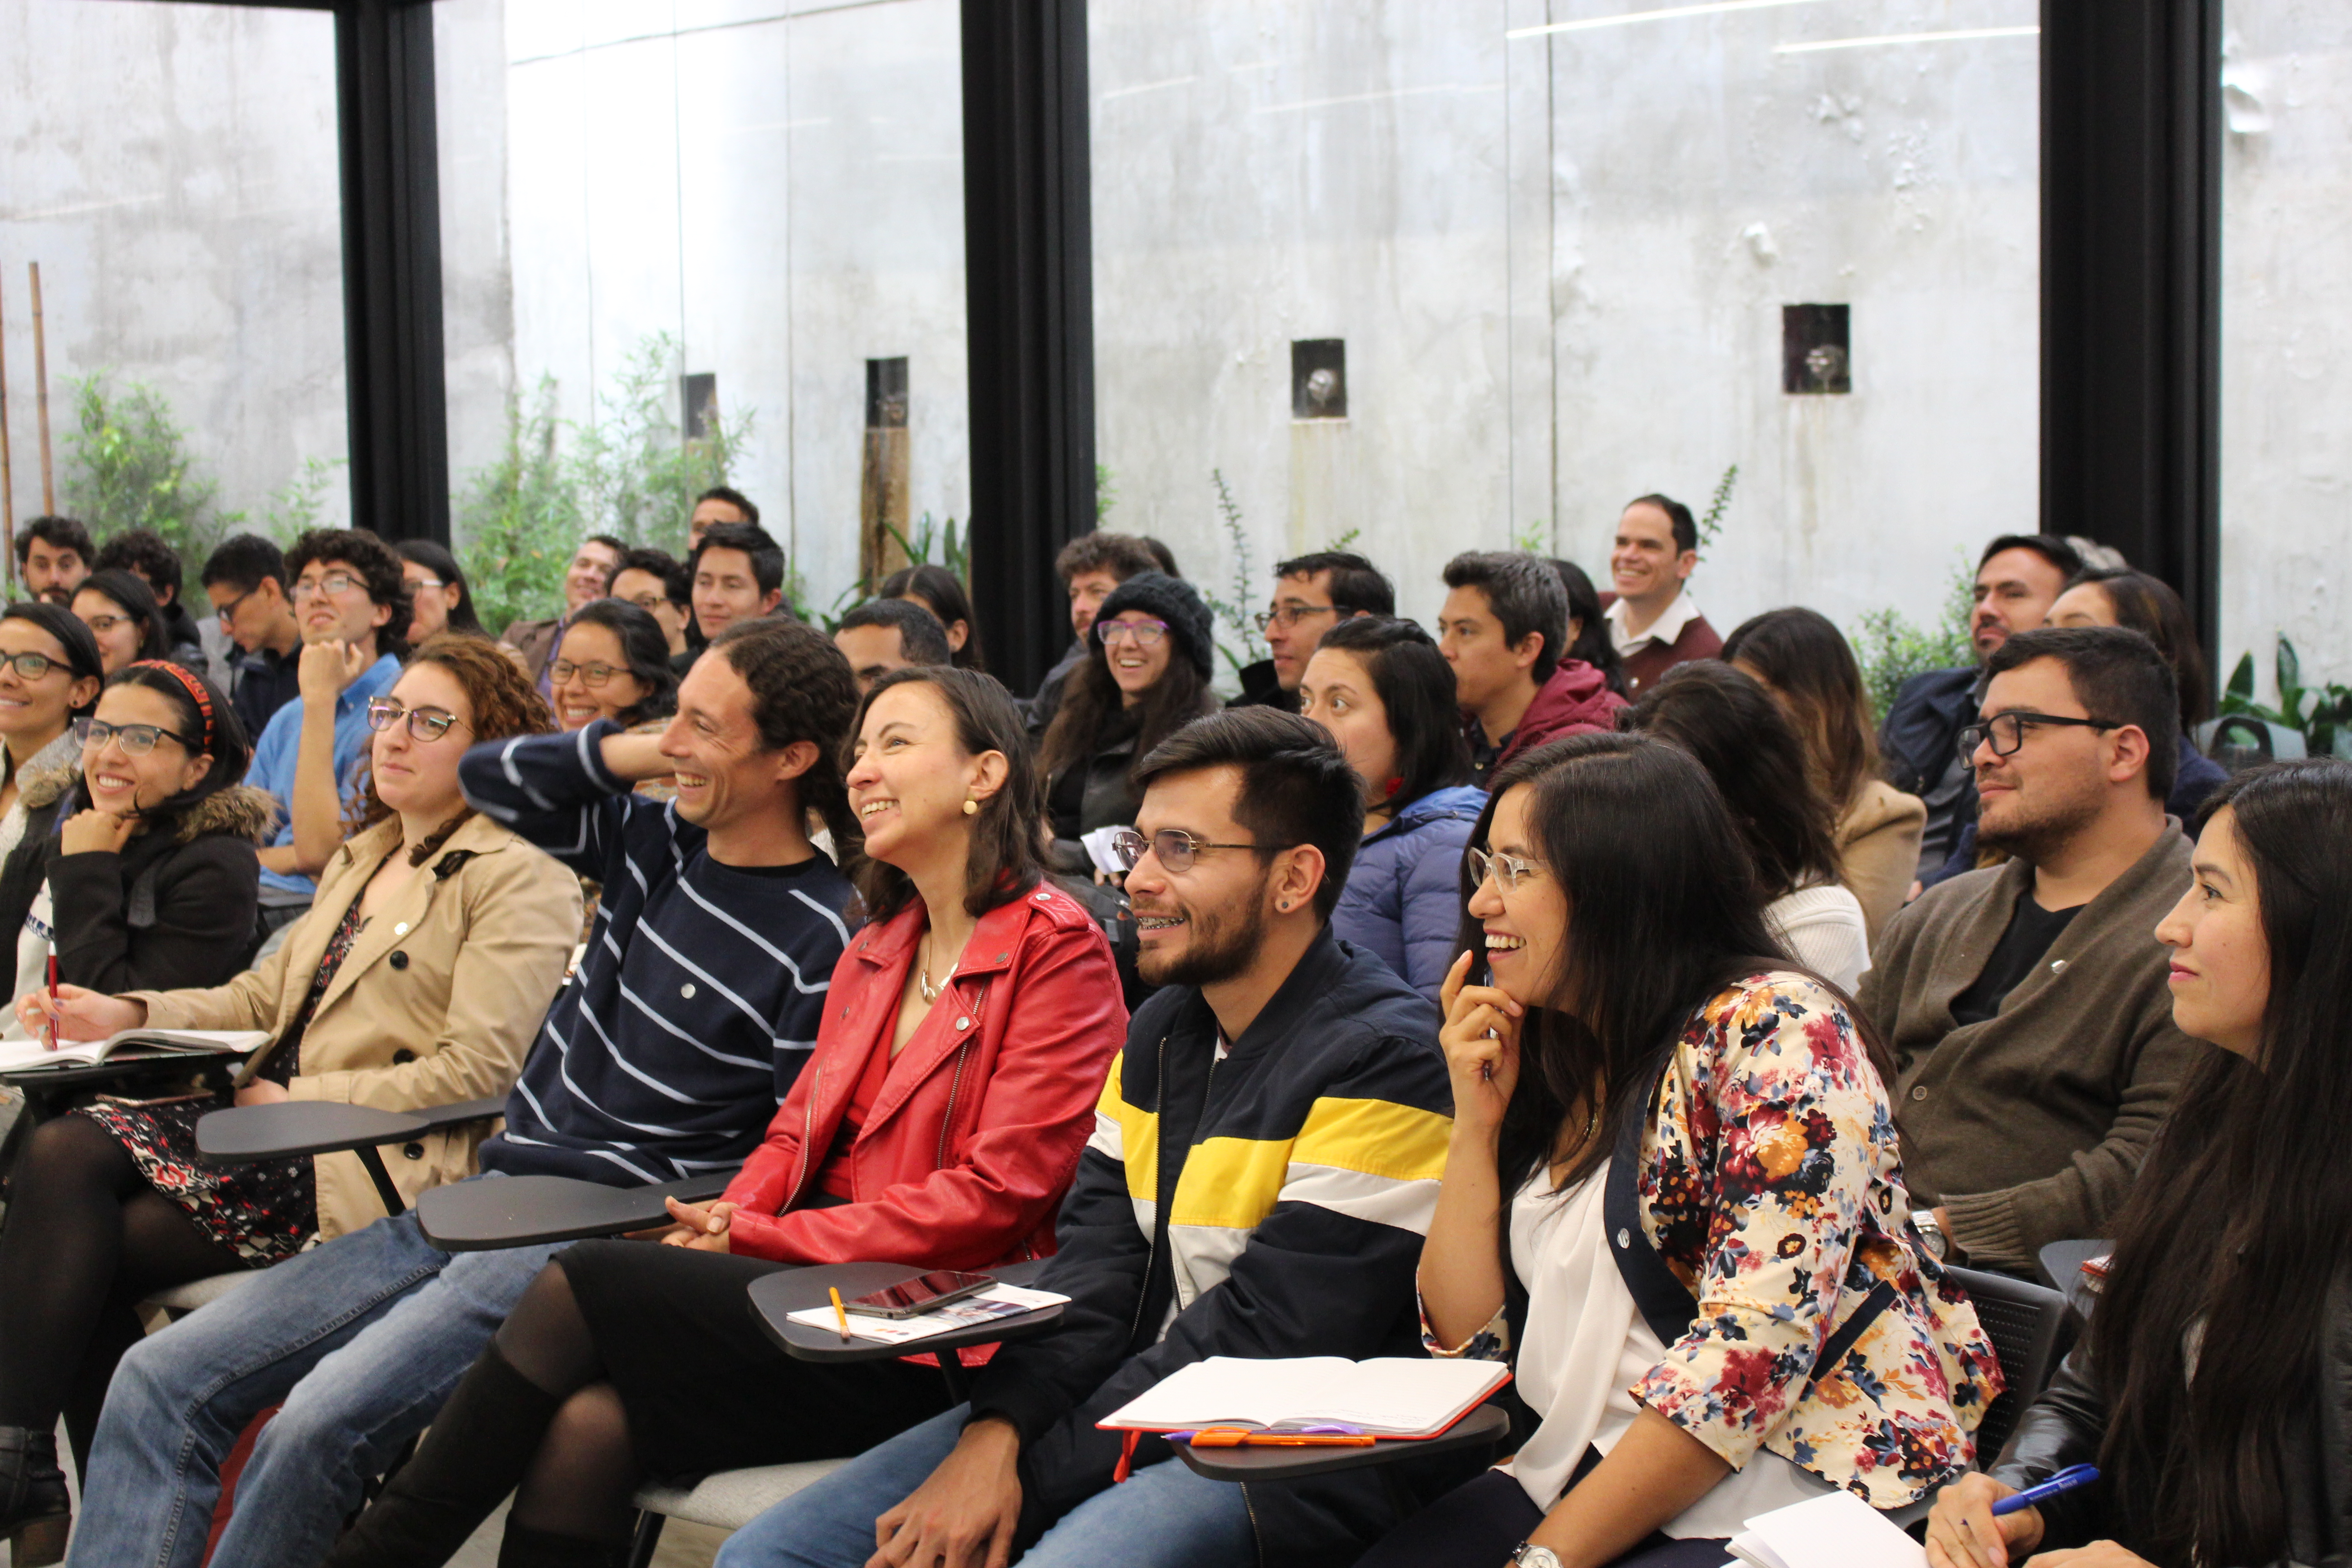 Colombian researchers interested in doctoral or postdoctoral research attended the workshop in Bogotá